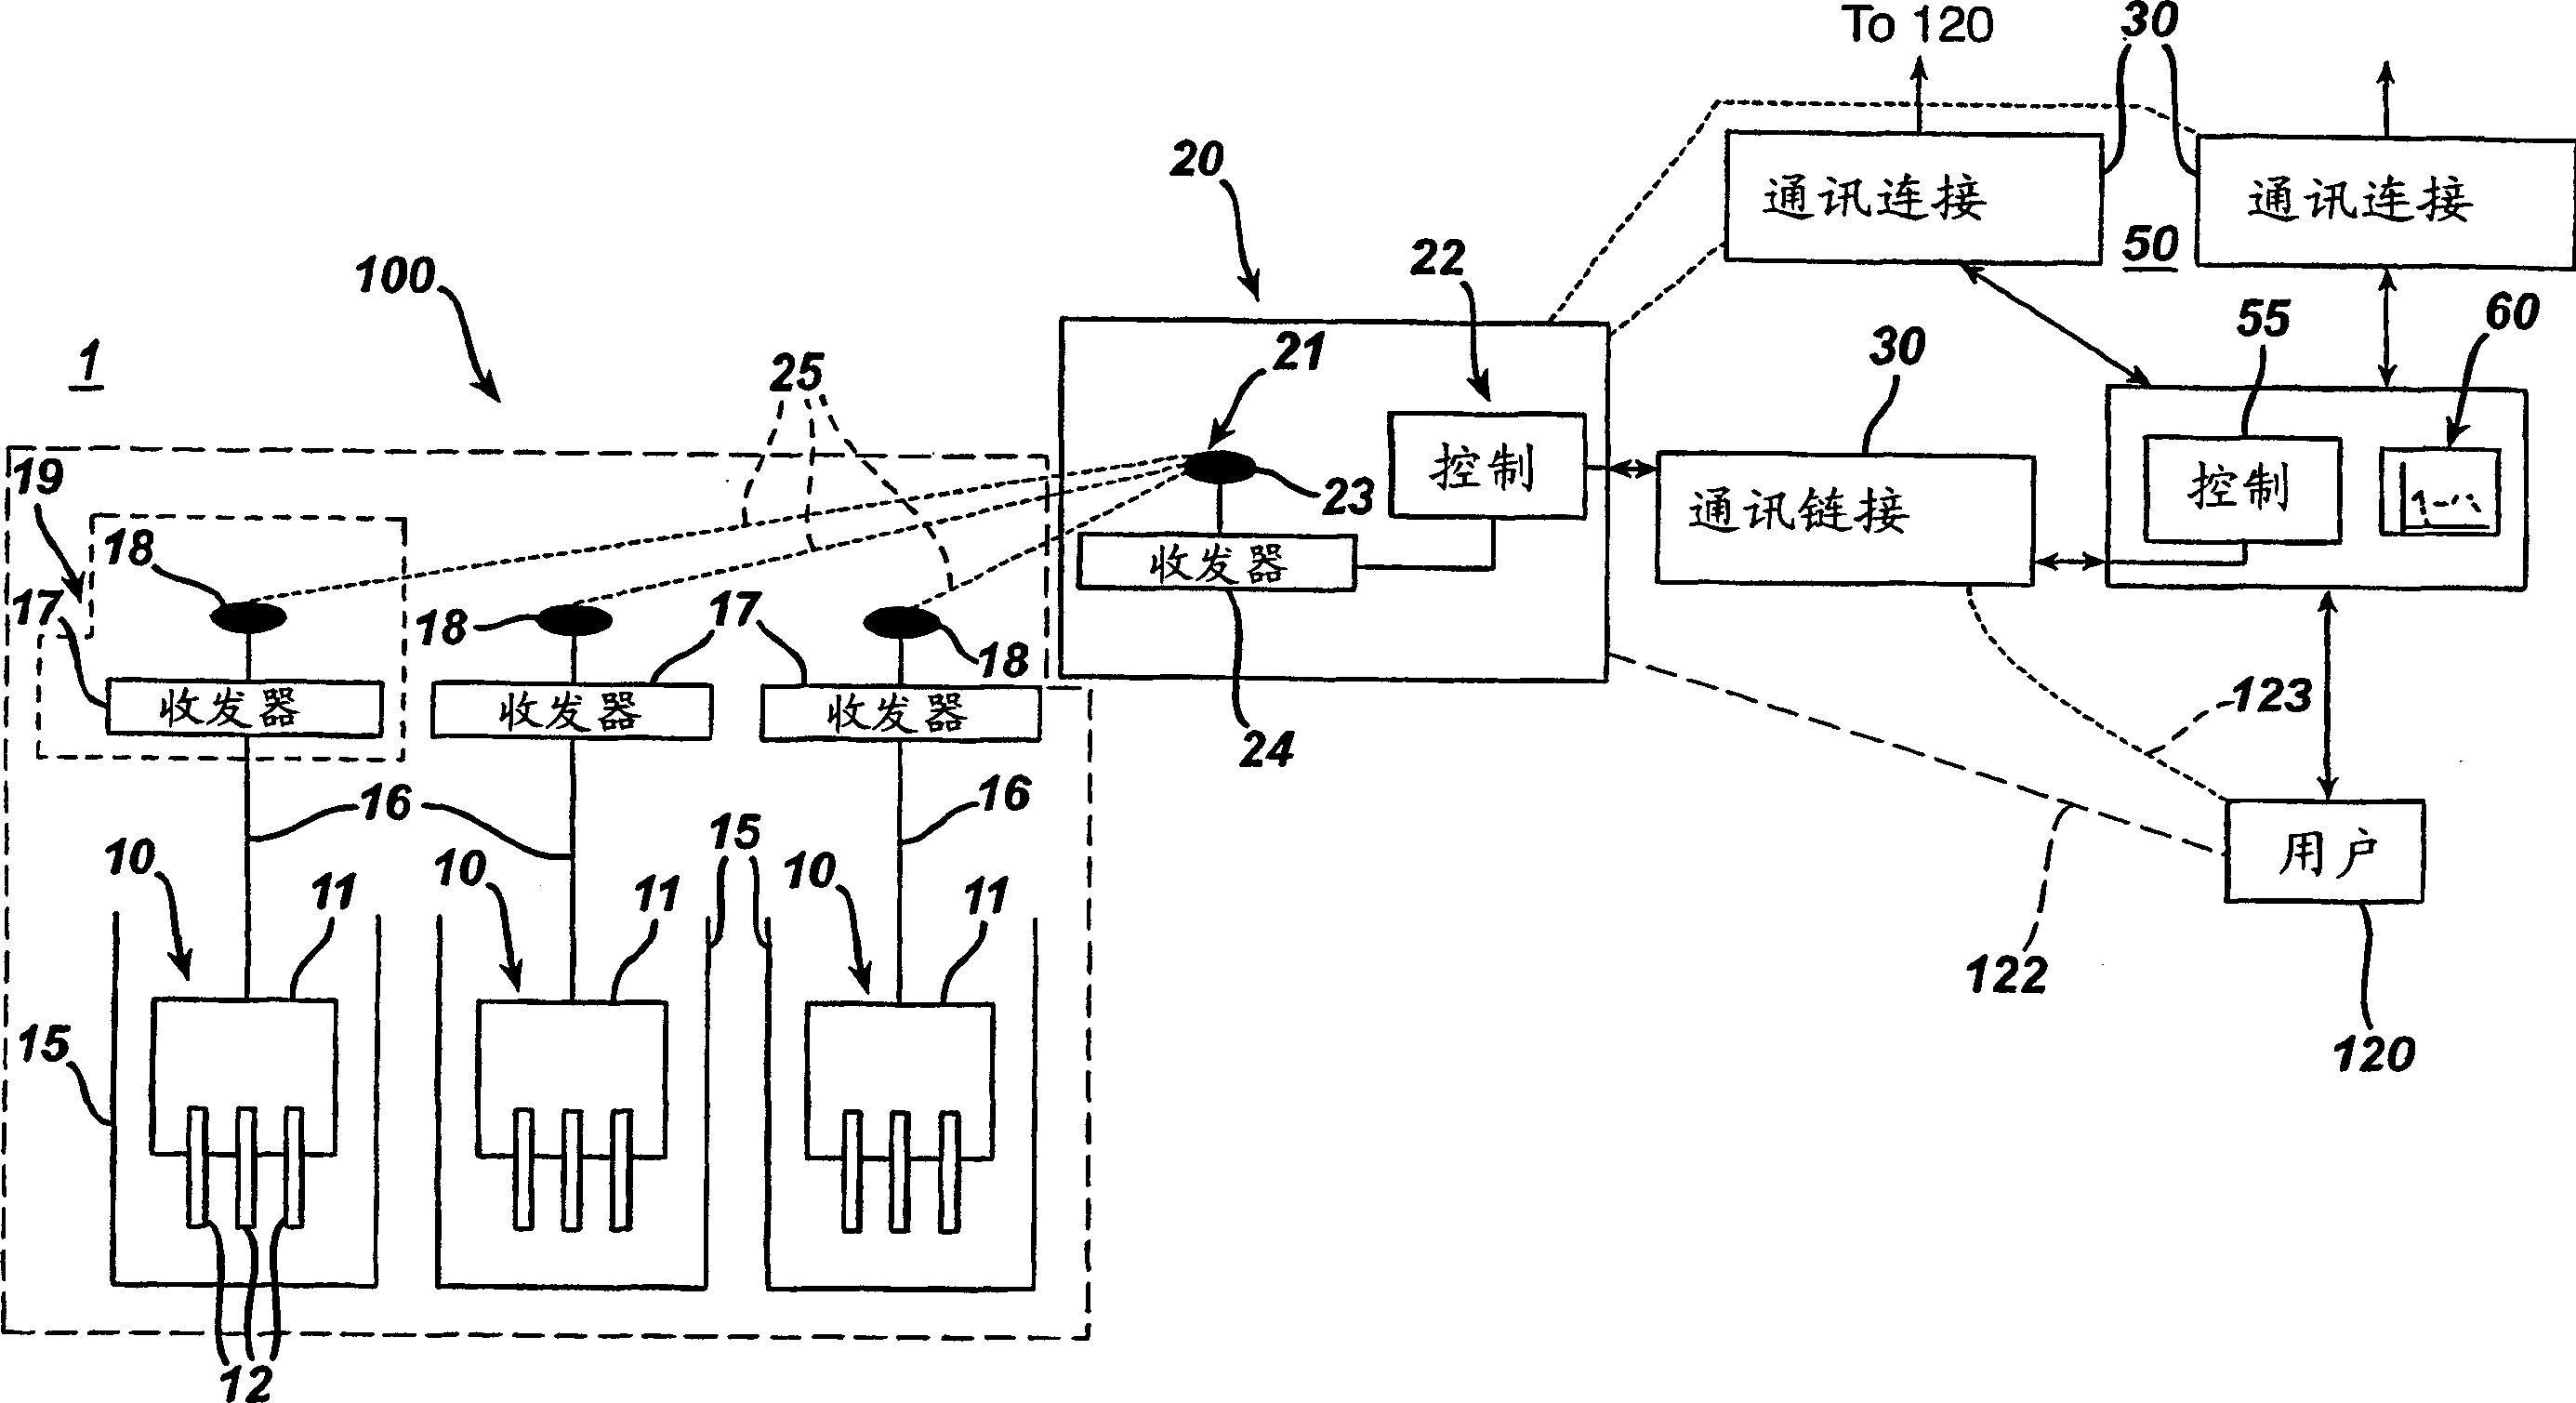 Method and system to remotely monitor groundwater treatment